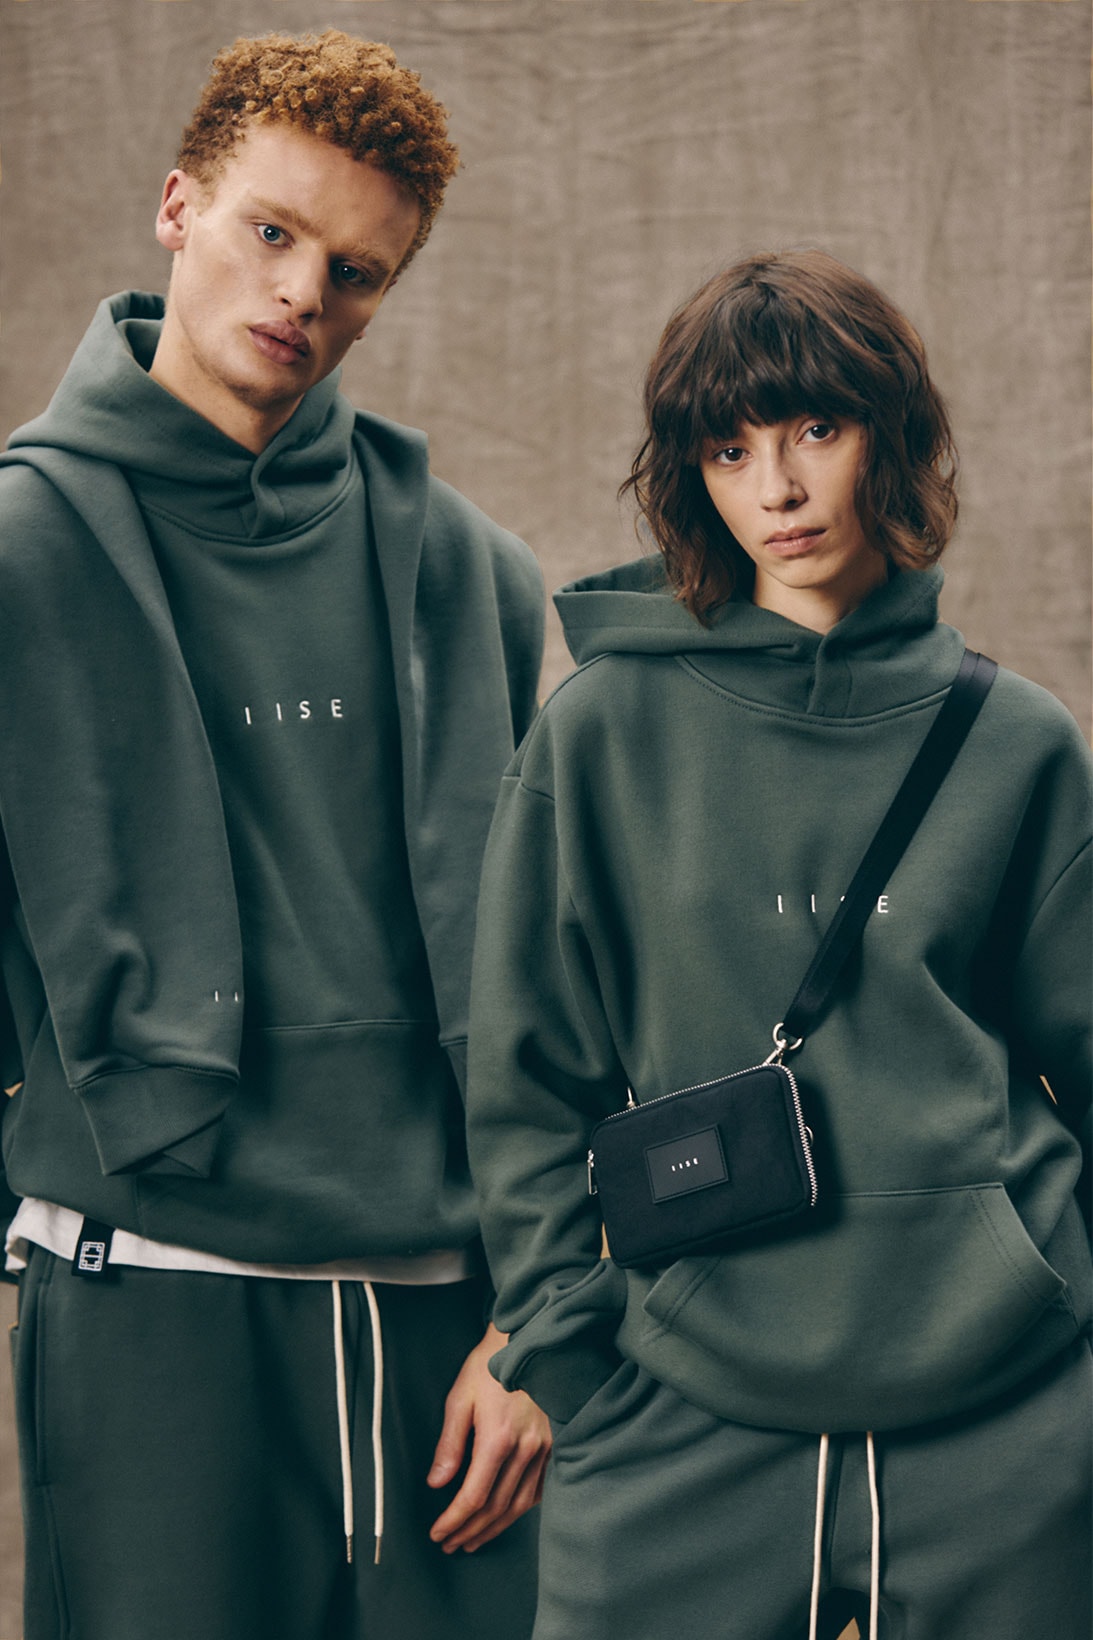 IISE Introduces Unisex Essential Sweats for FW20